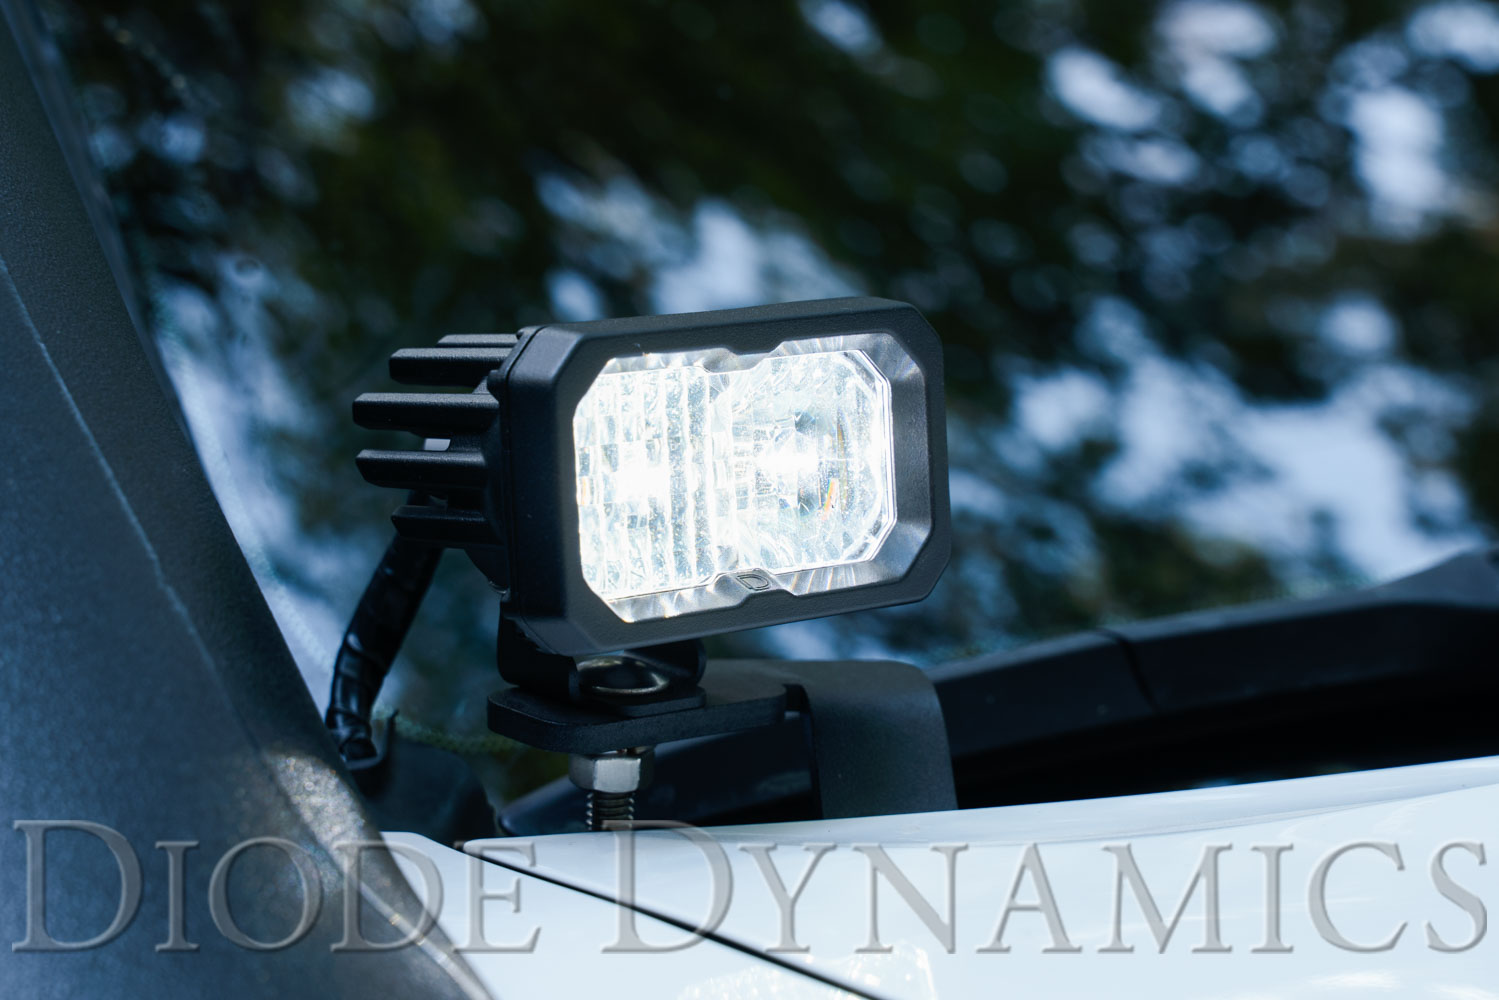 Diode Dynamics Stage Series 2 Inch LED Pod, Pro White Driving Standard WBL Each - Click Image to Close